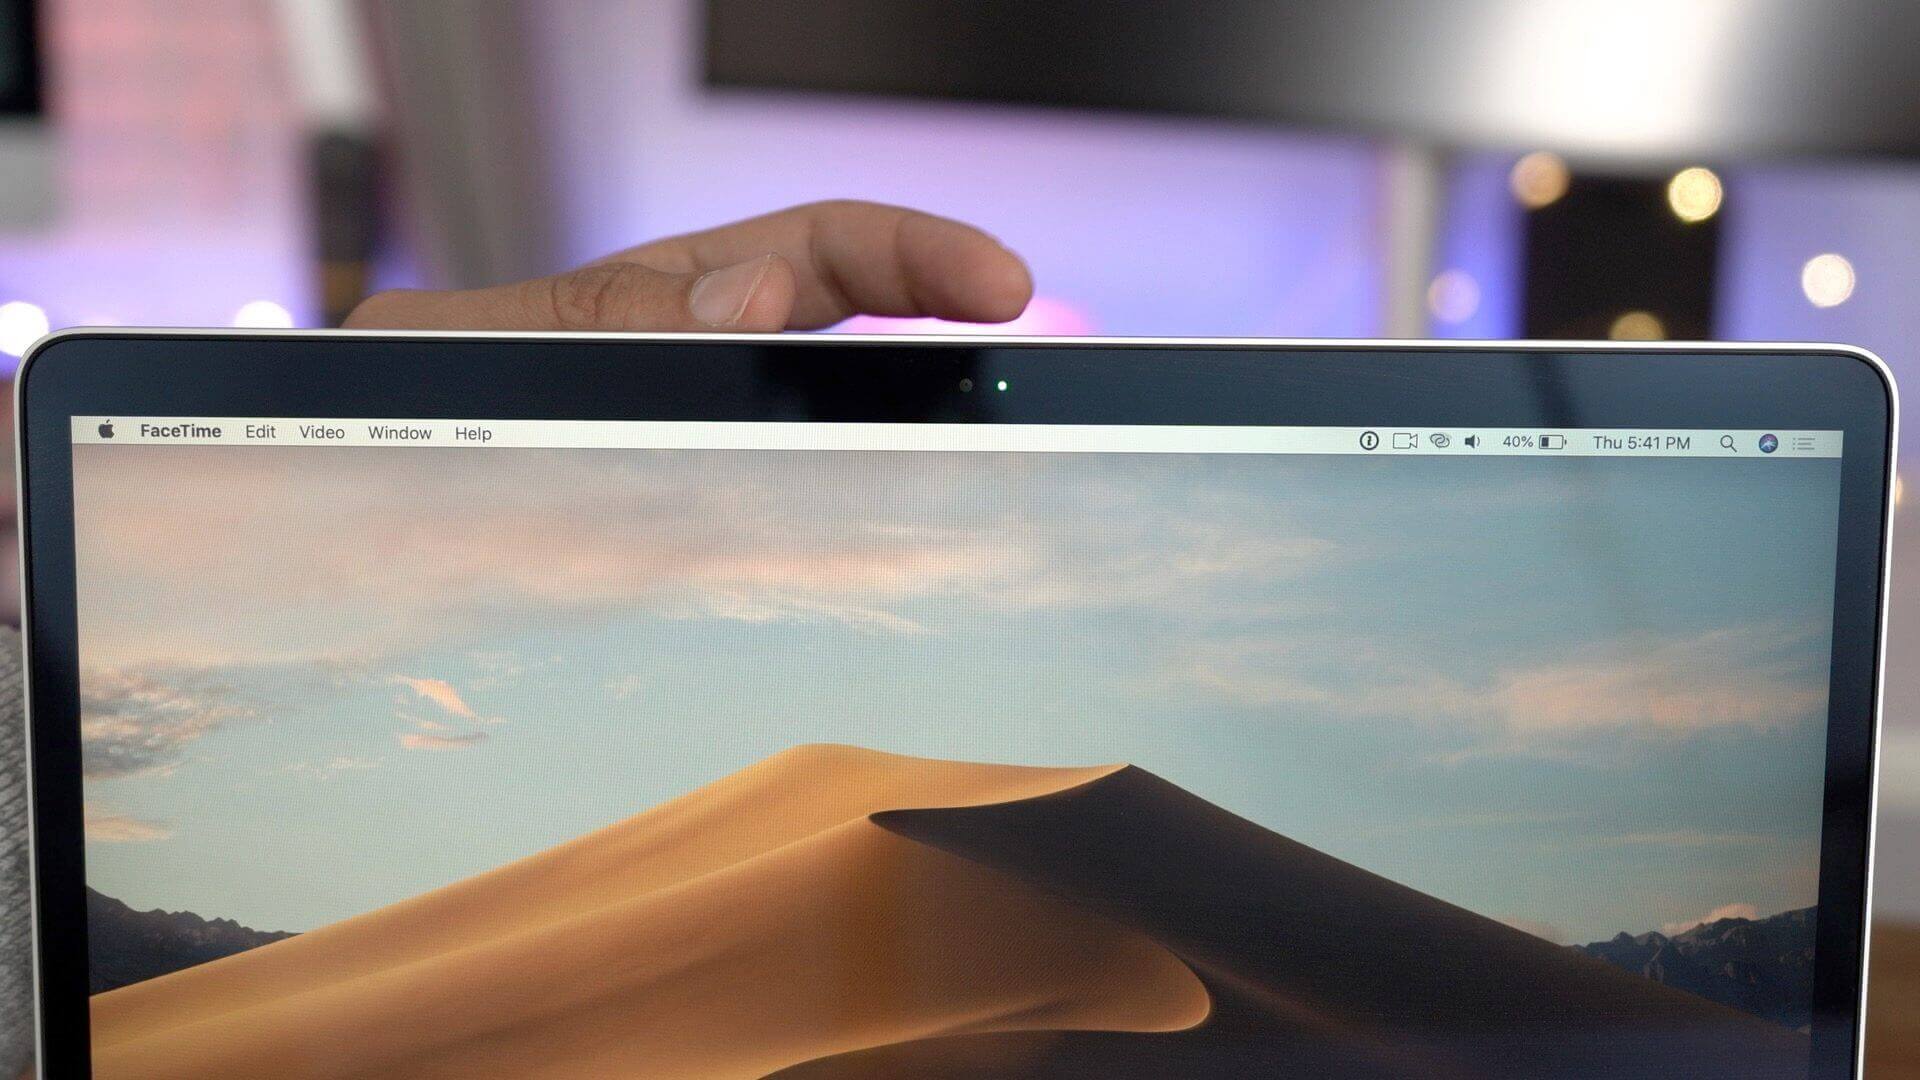 A macbook showing a desert on screen with a hand on the back of the screen